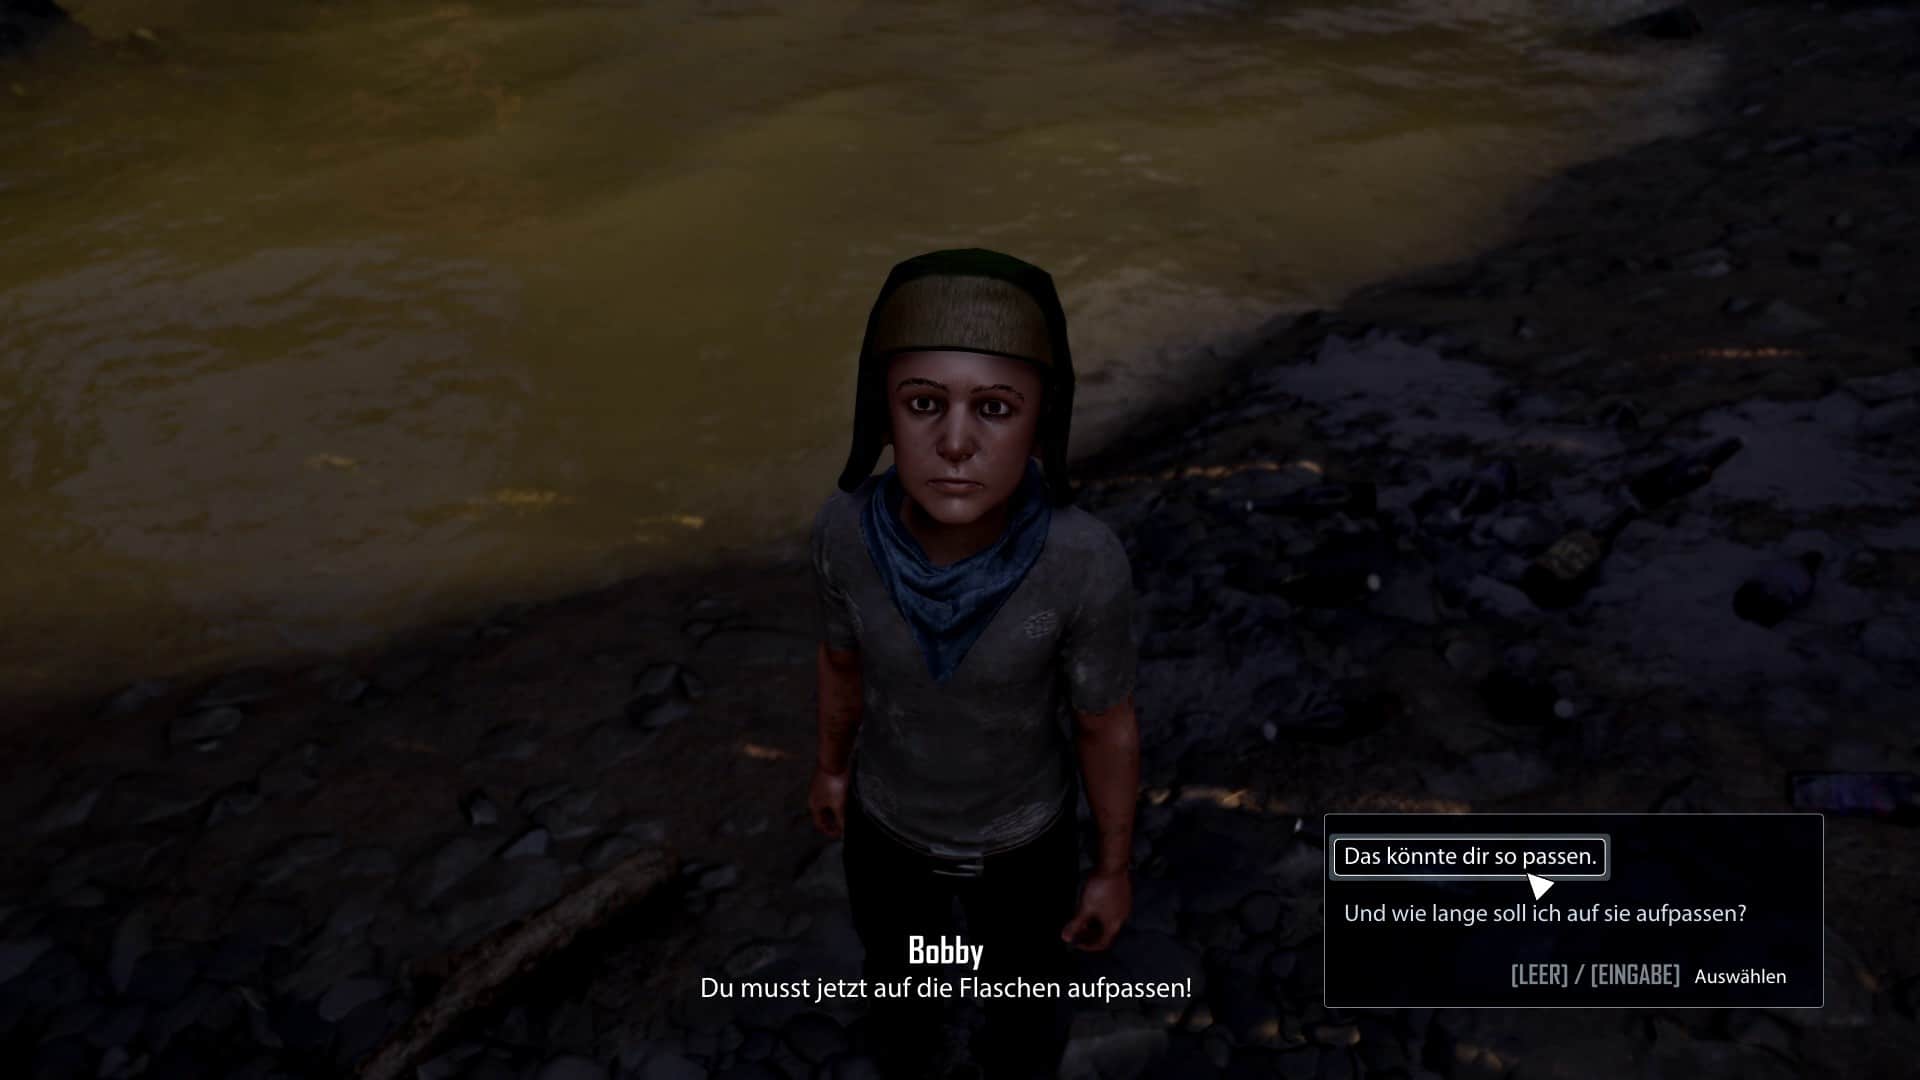 In Elex 2 you will also encounter children - a first for Piranha Bytes. One of them is even Jax's son.